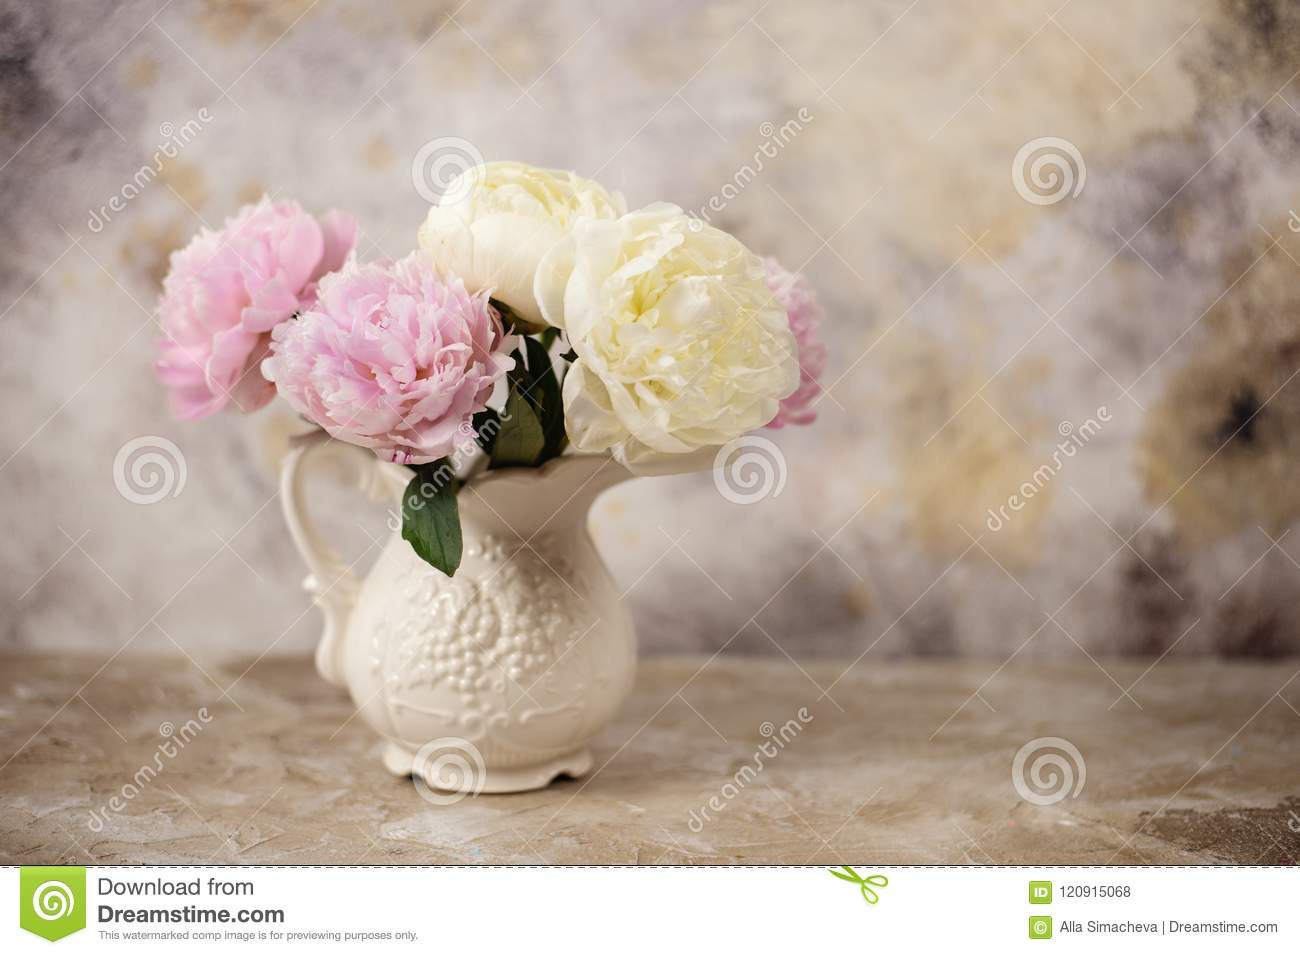 22 Great Pink Glass Vase Antique 2024 free download pink glass vase antique of fresh pink peonies flowers on aged wooden background front view throughout fresh pink peonies flowers in a vaze on aged wooden background front view with copy spac